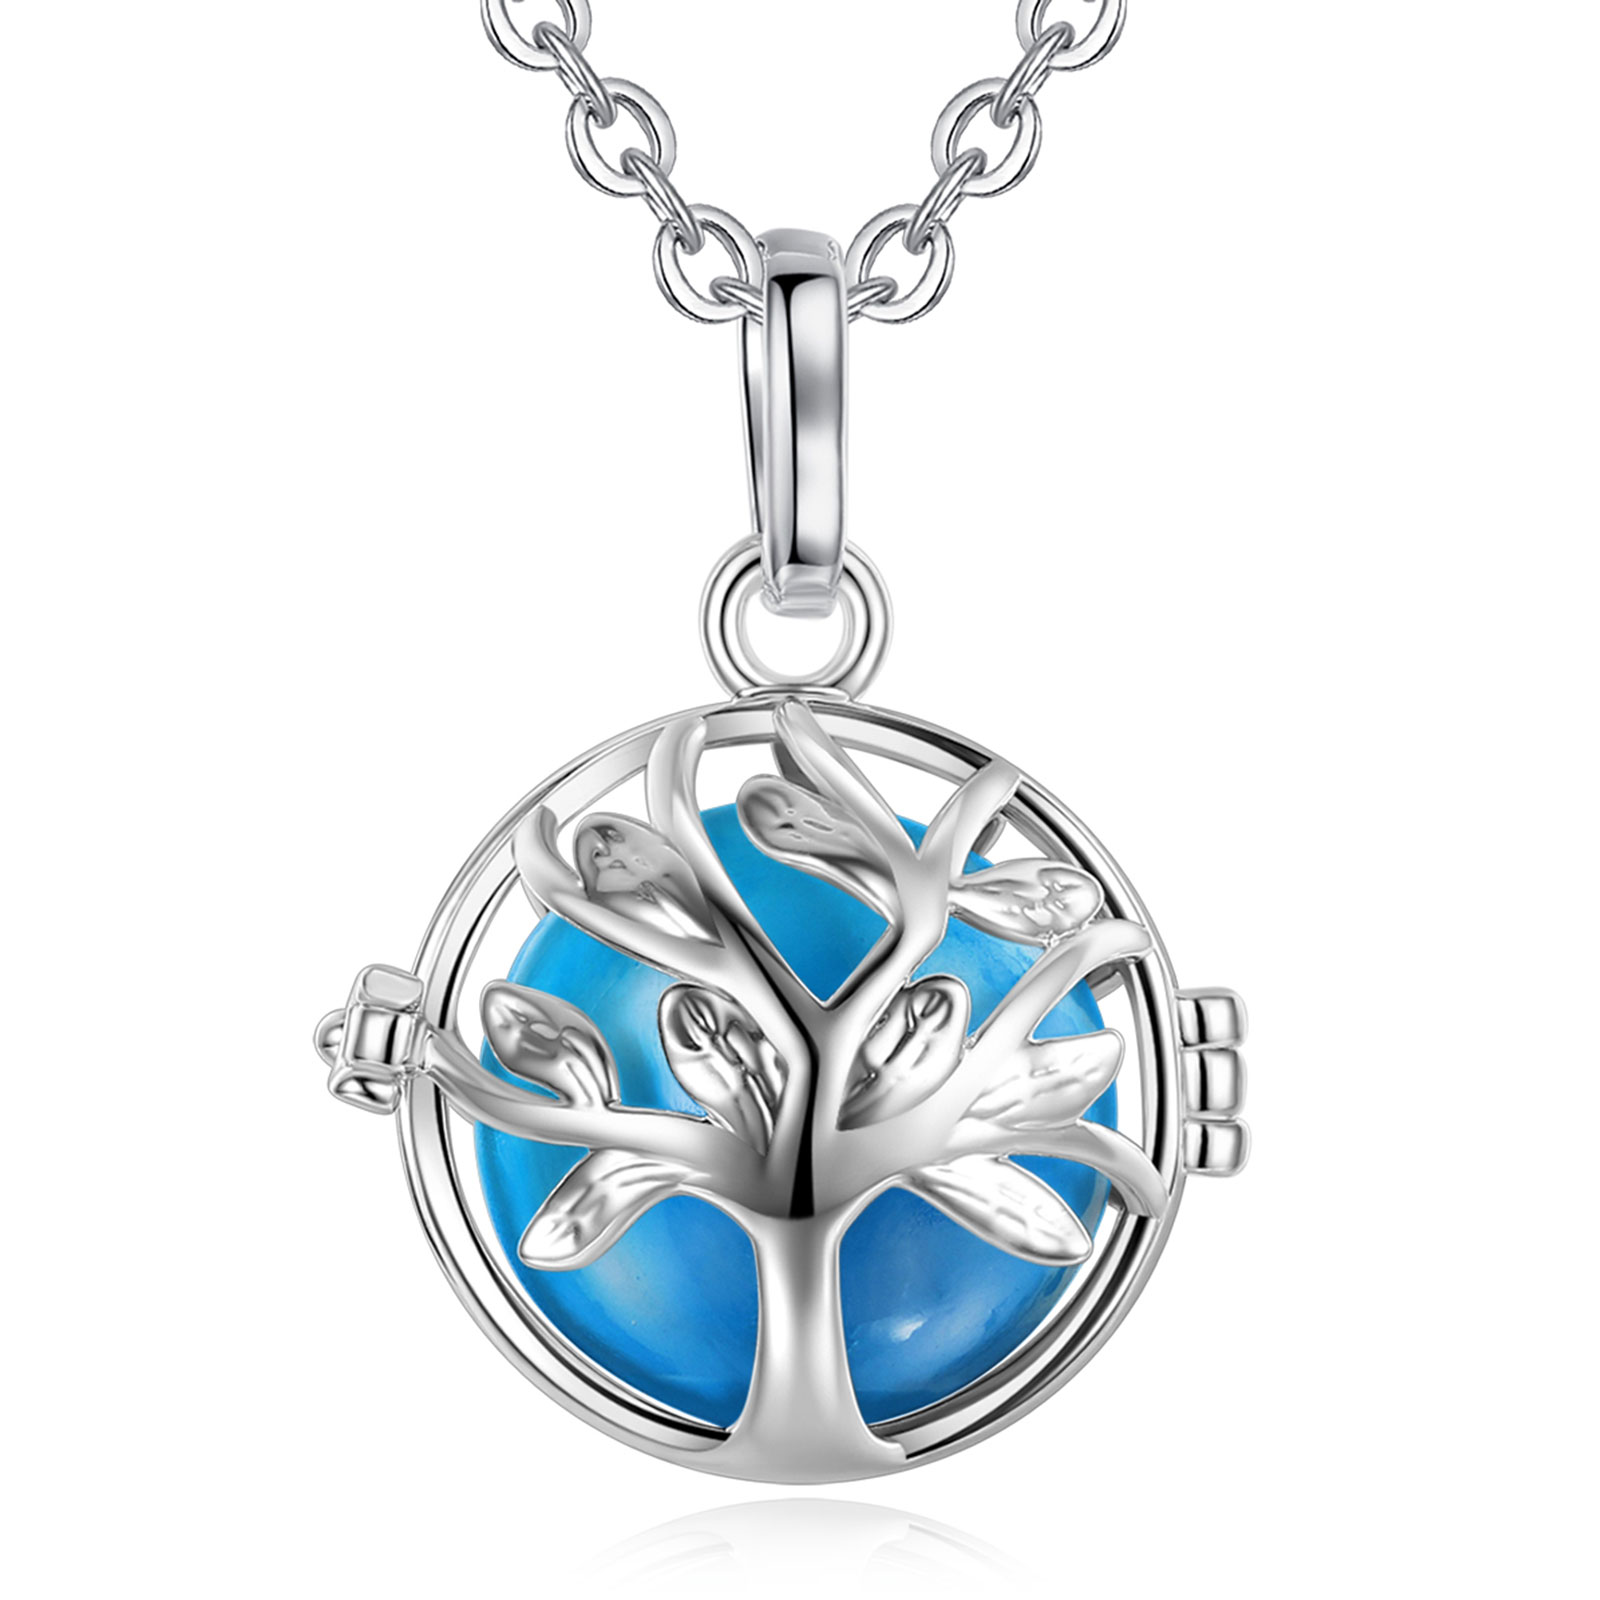 Merryshine Jewelry S925 Sterling Silver Tree of Life Jewellery Mexican Bola Ball Necklace Pendant